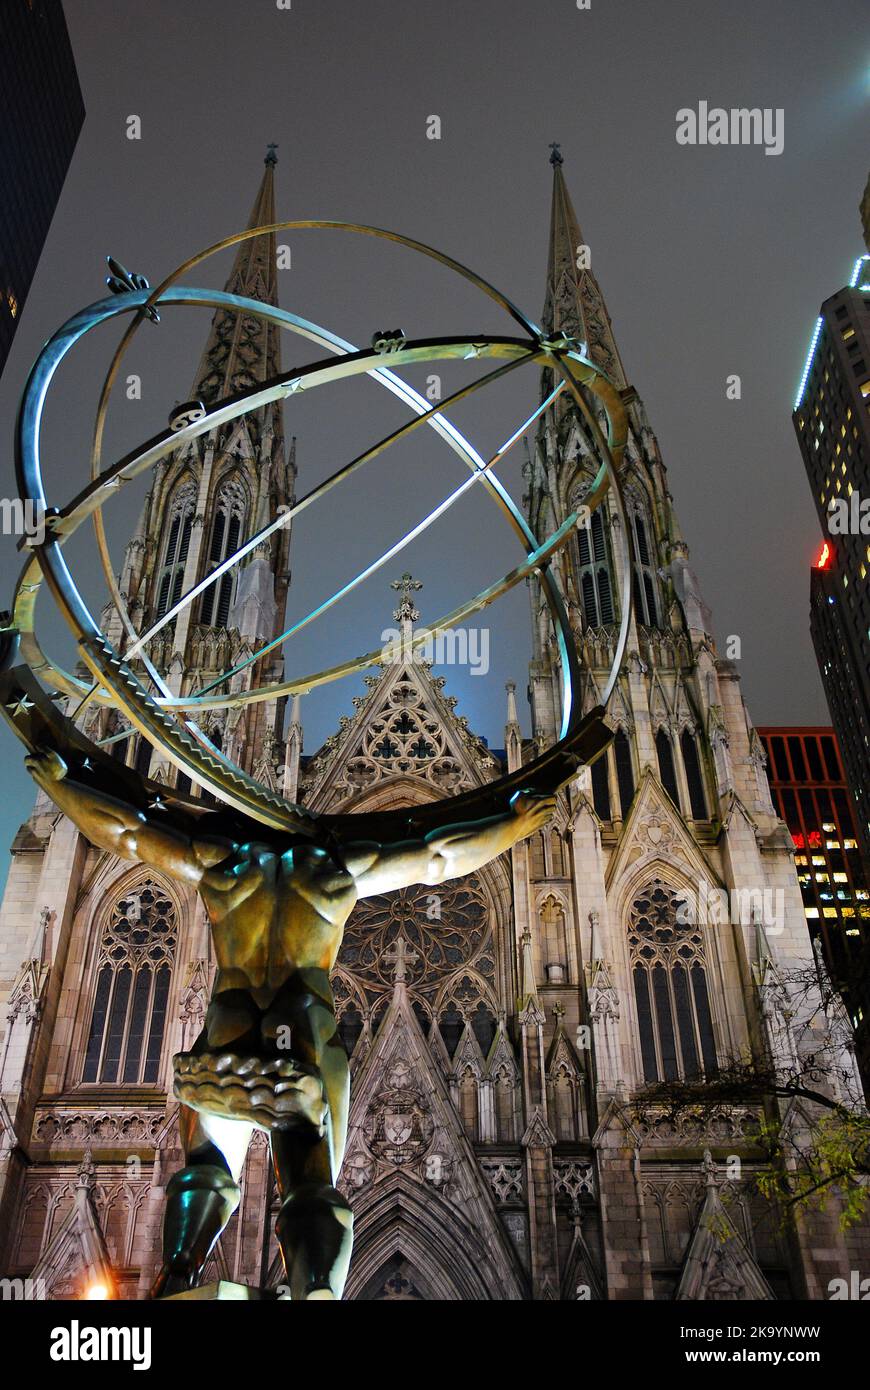 A sculpture of Atlas in Rockefeller Center Stands Strong in Front of St Patrick's Cathedral, New York Stock Photo